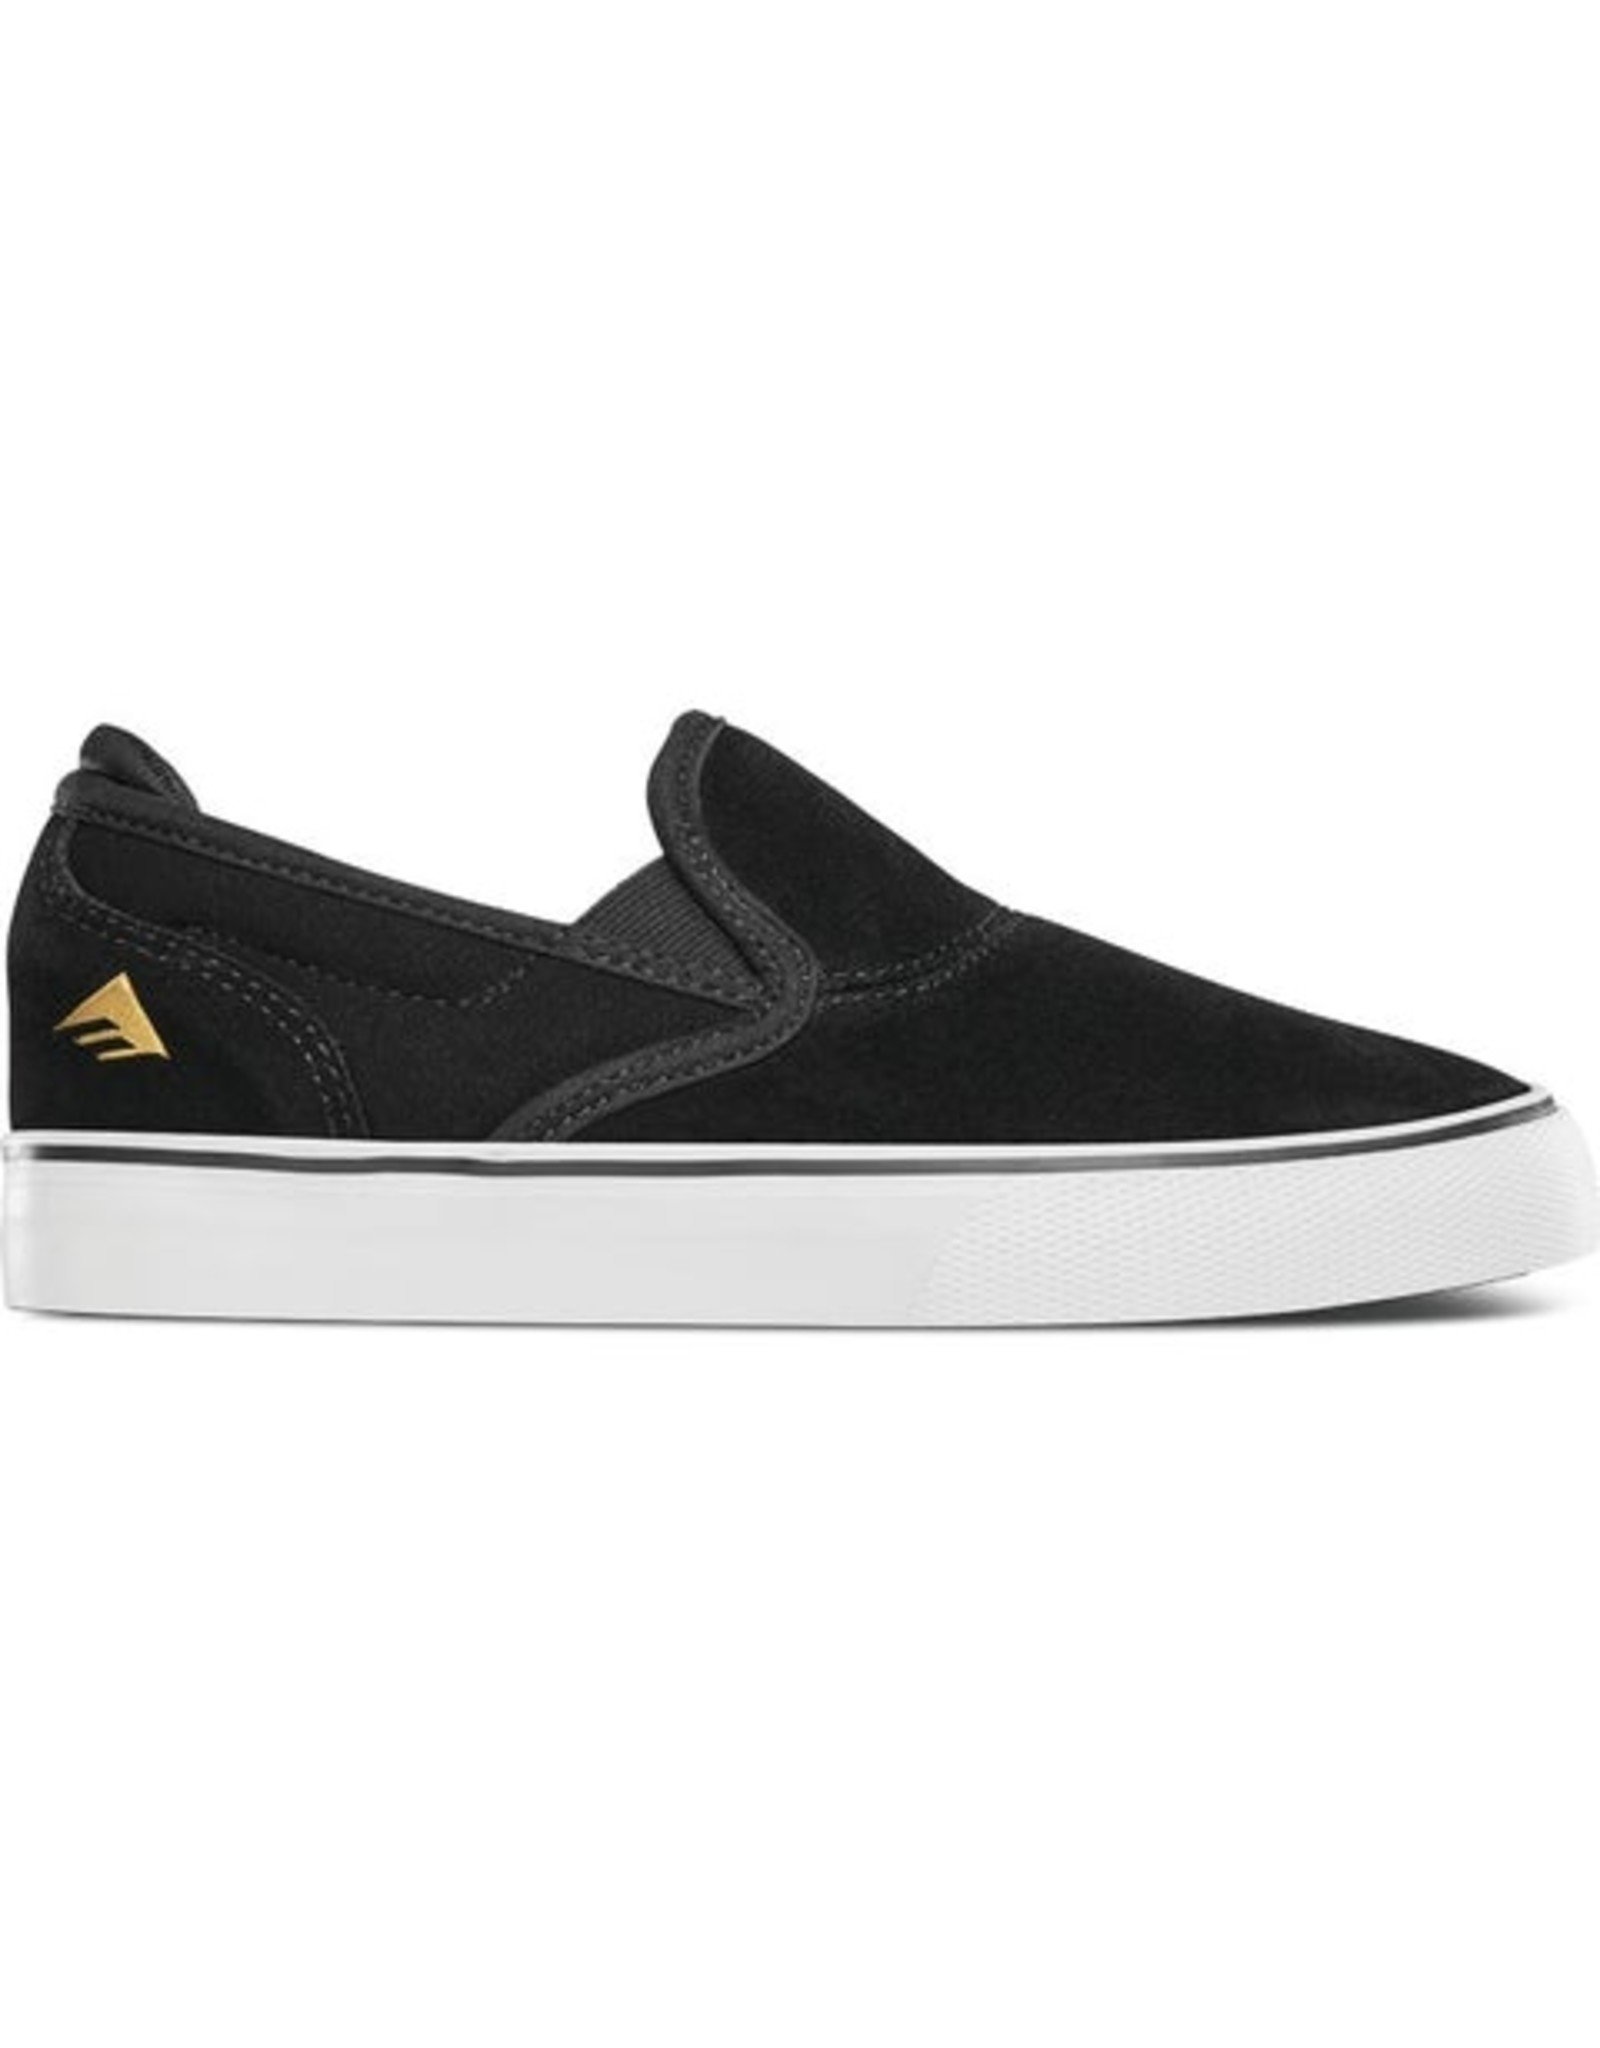 Emerica Wino G6 Slip On Youth Shoes